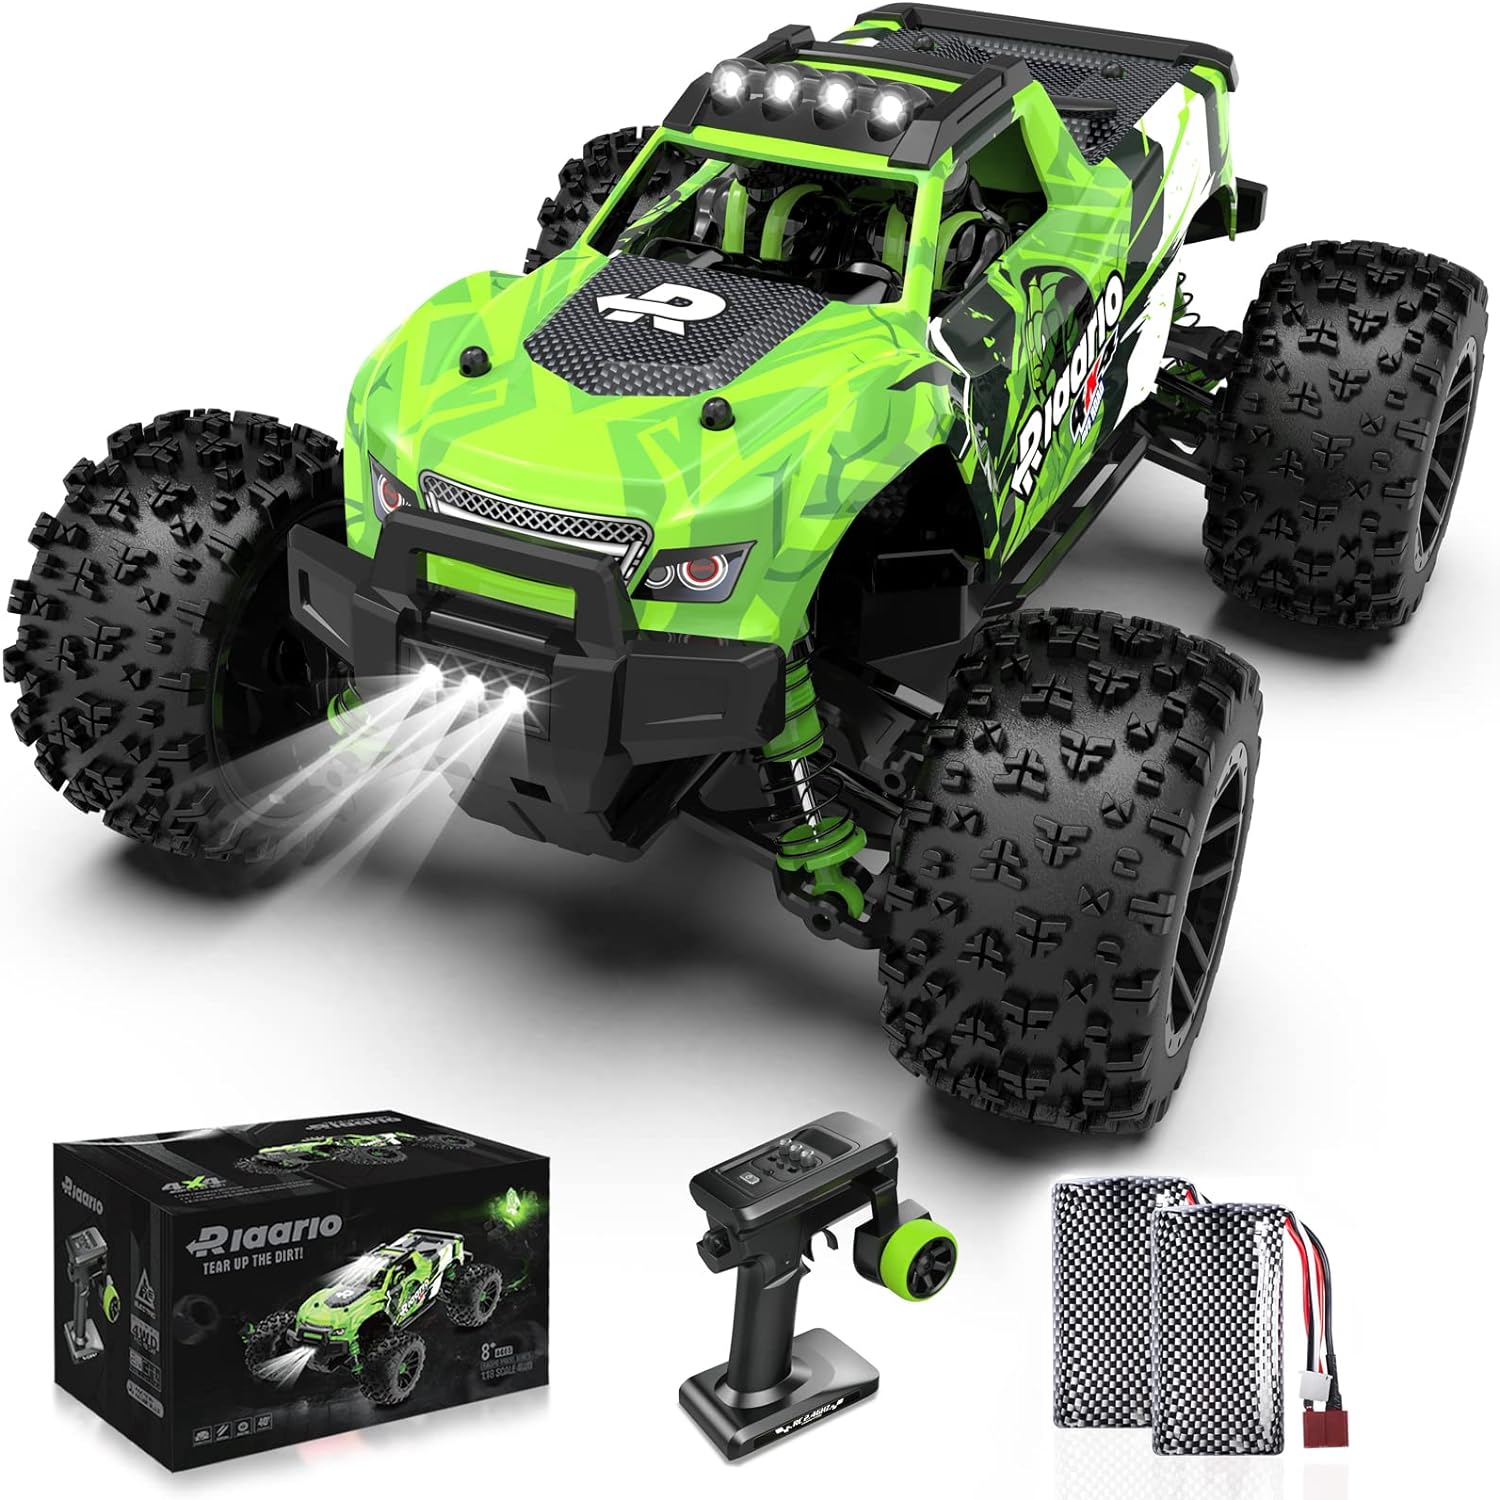 RIAARIO 1:18 All Terrain RC Car, 36 KPH High Speed Remote Control Car with 2.4 GHz Remote Control, 4WD Electric Vehicle Off-Road Truck, 4X4 Waterproof RC Trucks with 2 Rechargeable Batteries